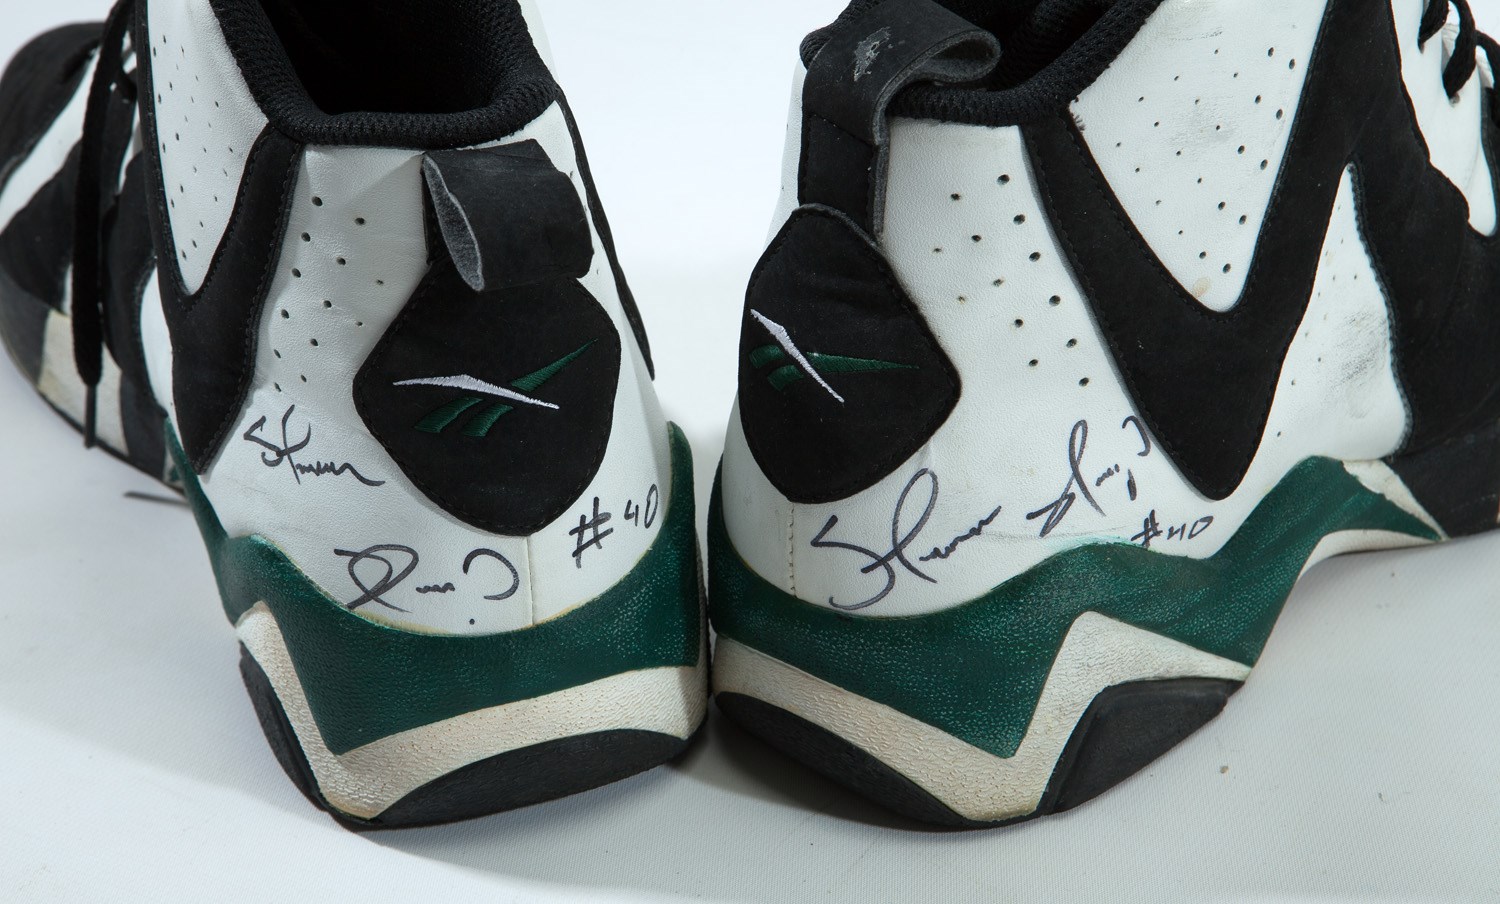 Lot Detail - 1994-95 SHAWN KEMP (SONICS ERA) GAME WORN & SIGNED REEBOK  'KAMIKAZE 1' SHOES – HIS FIRST SIGNATURE MODEL (COBY KARL COLLECTION)